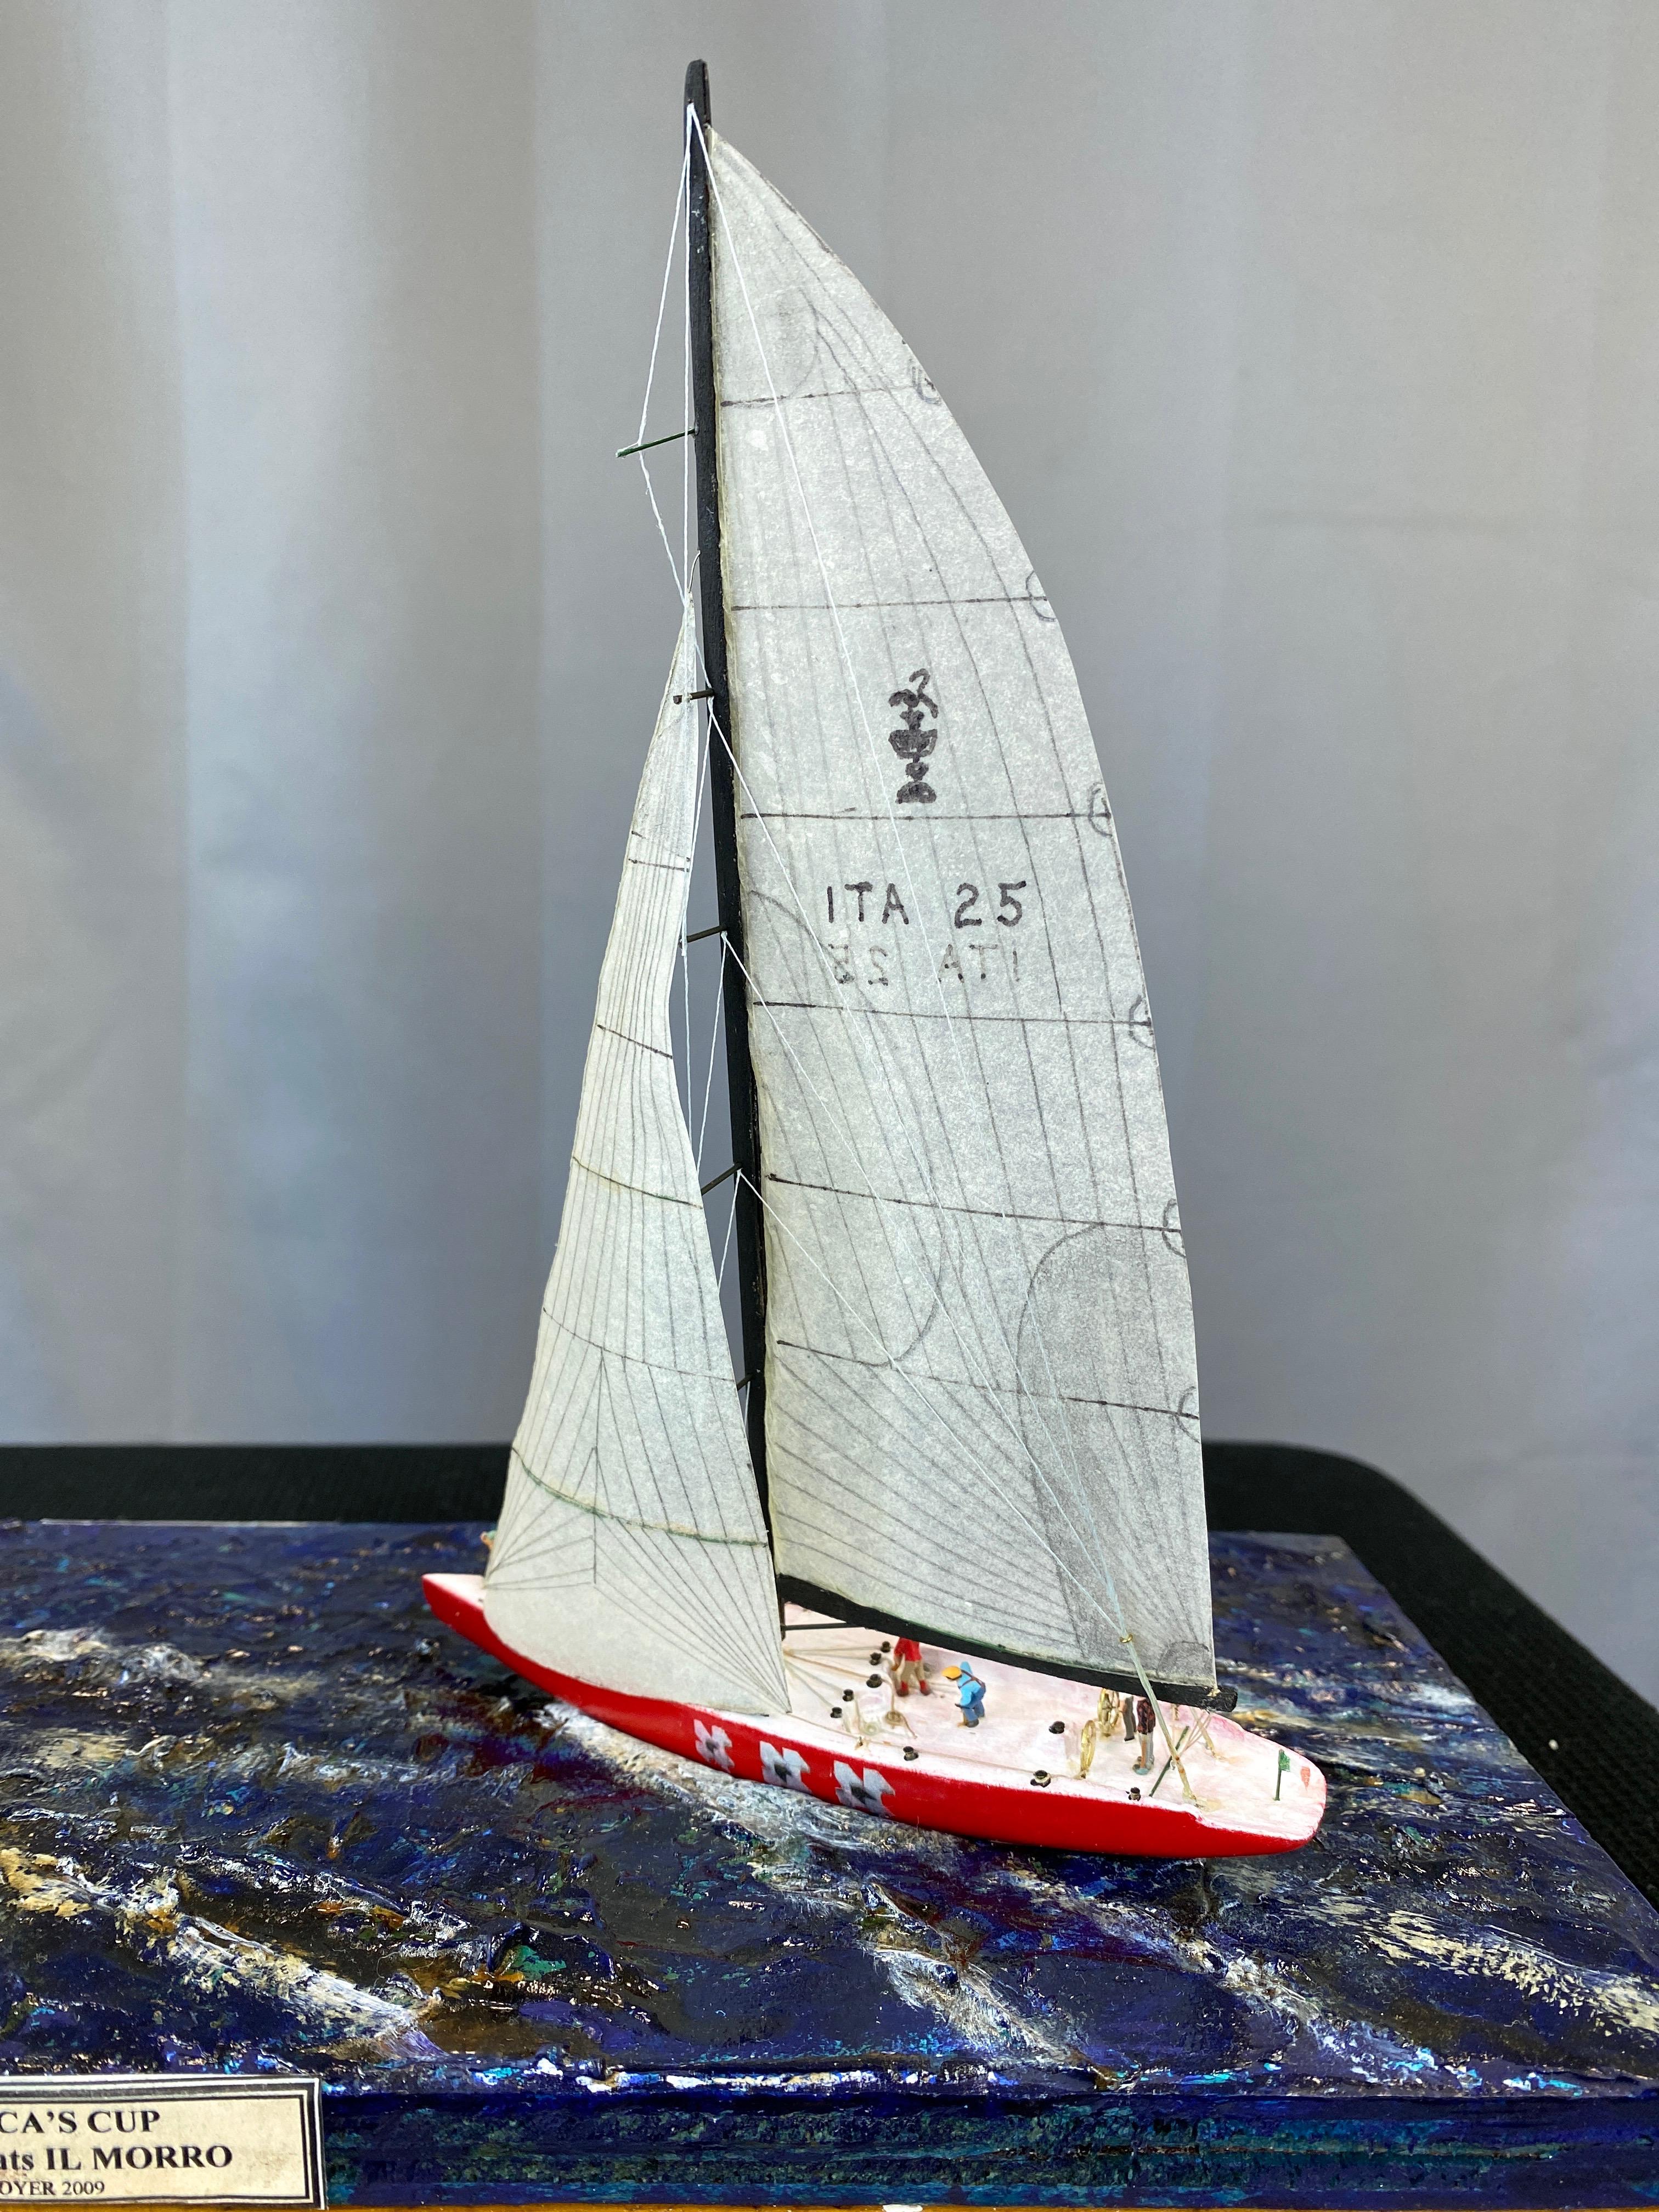 R. Royer 1992 28th America’s Cup Hand-Built Cased Diorama, 2009 9